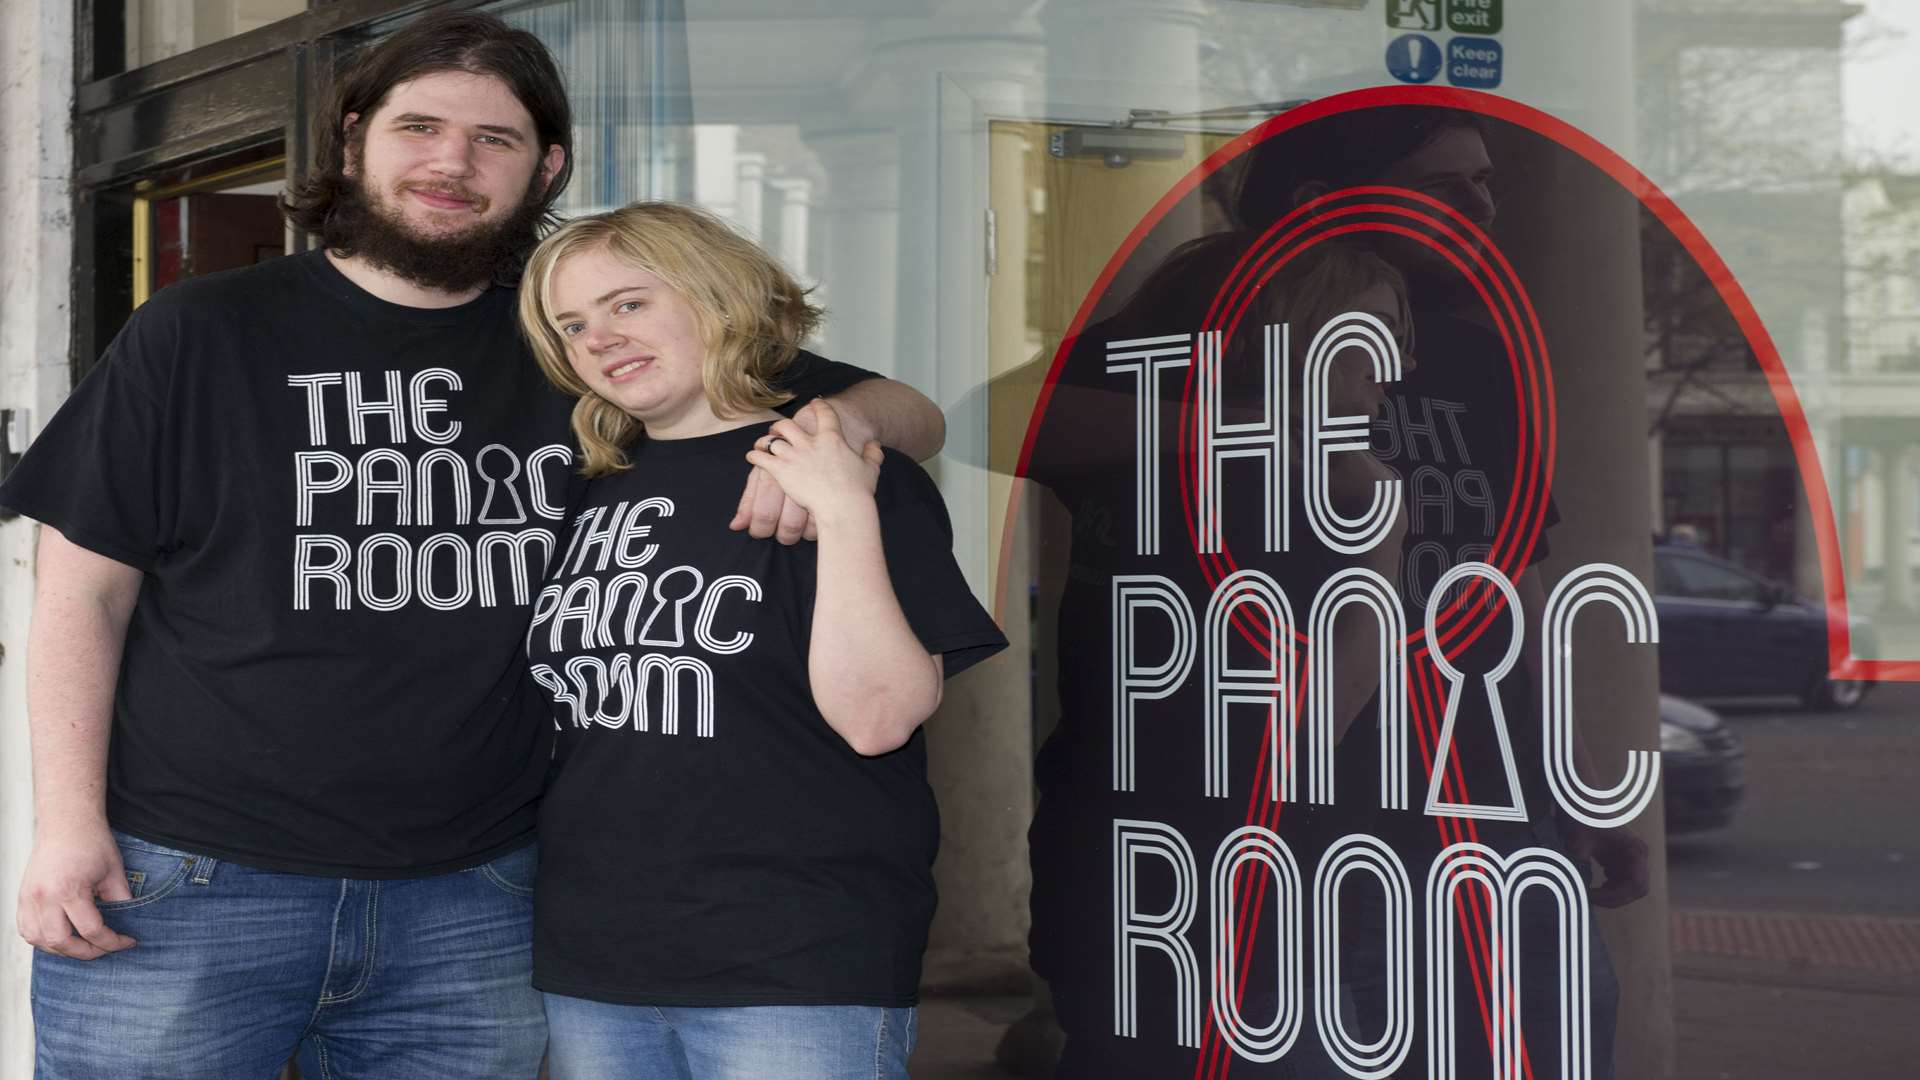 Owners Alex and Monique Souter are now running two escape rooms at the new venue.